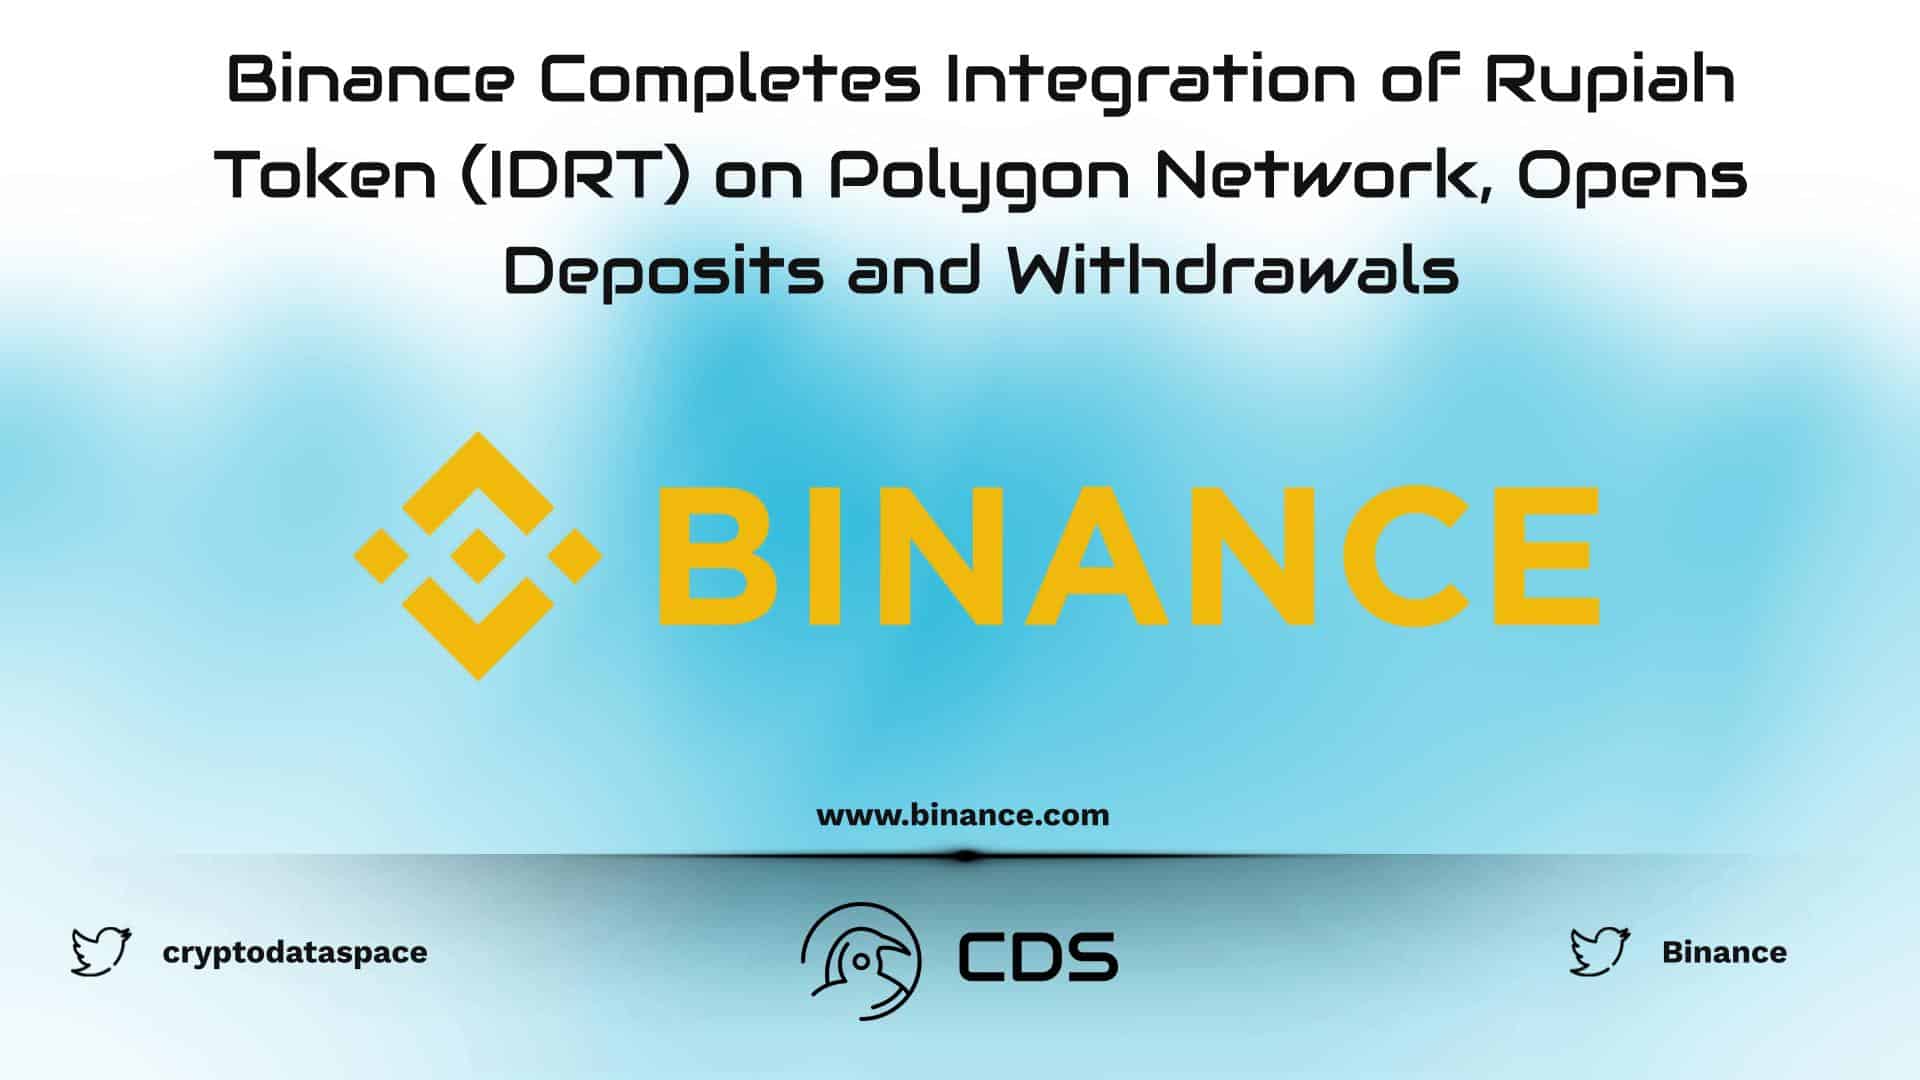 Binance Completes Integration of Rupiah Token (IDRT) on Polygon Network, Opens Deposits and Withdrawals